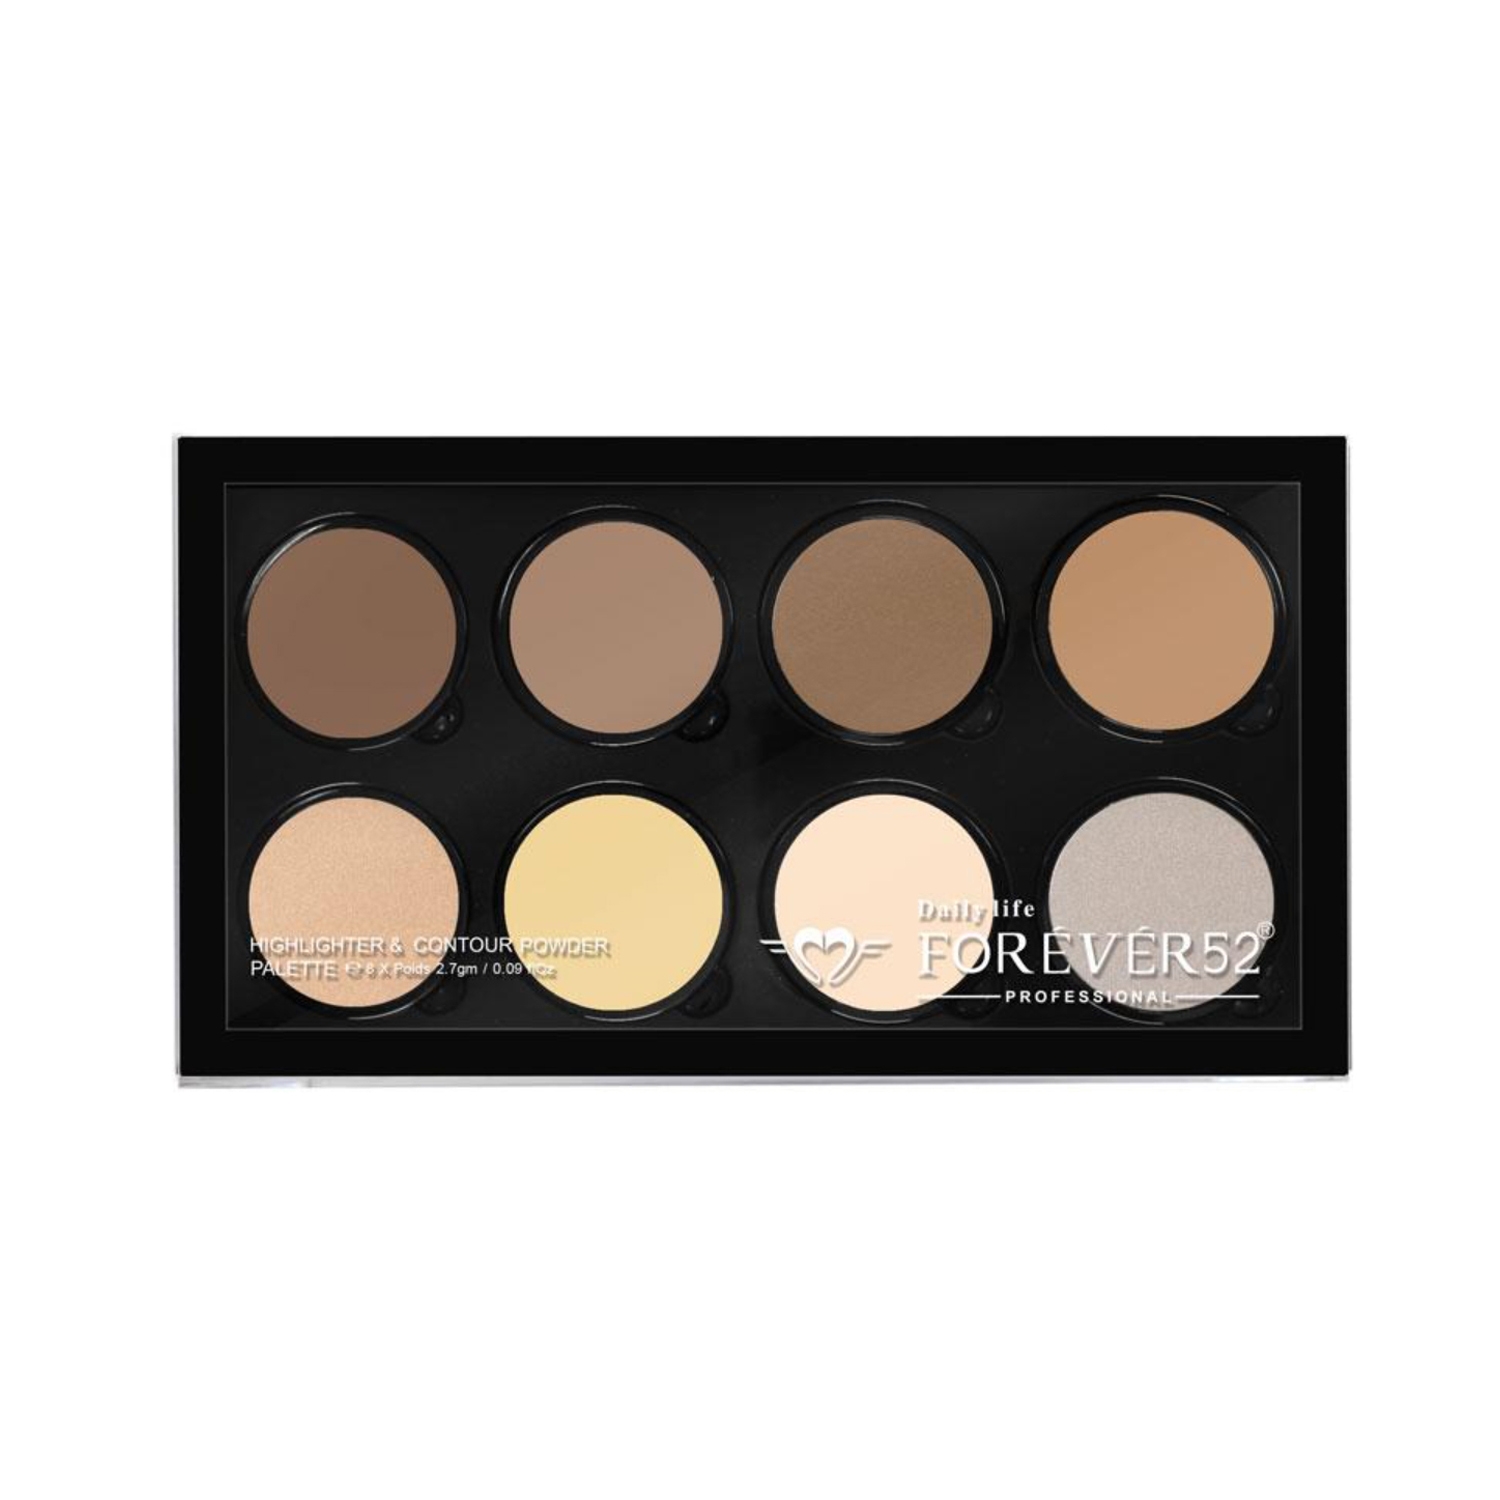 Daily Life Forever52 | Daily Life Forever52 Highlighter Contour Pallete FHC001 - Multi Color (21.6g)